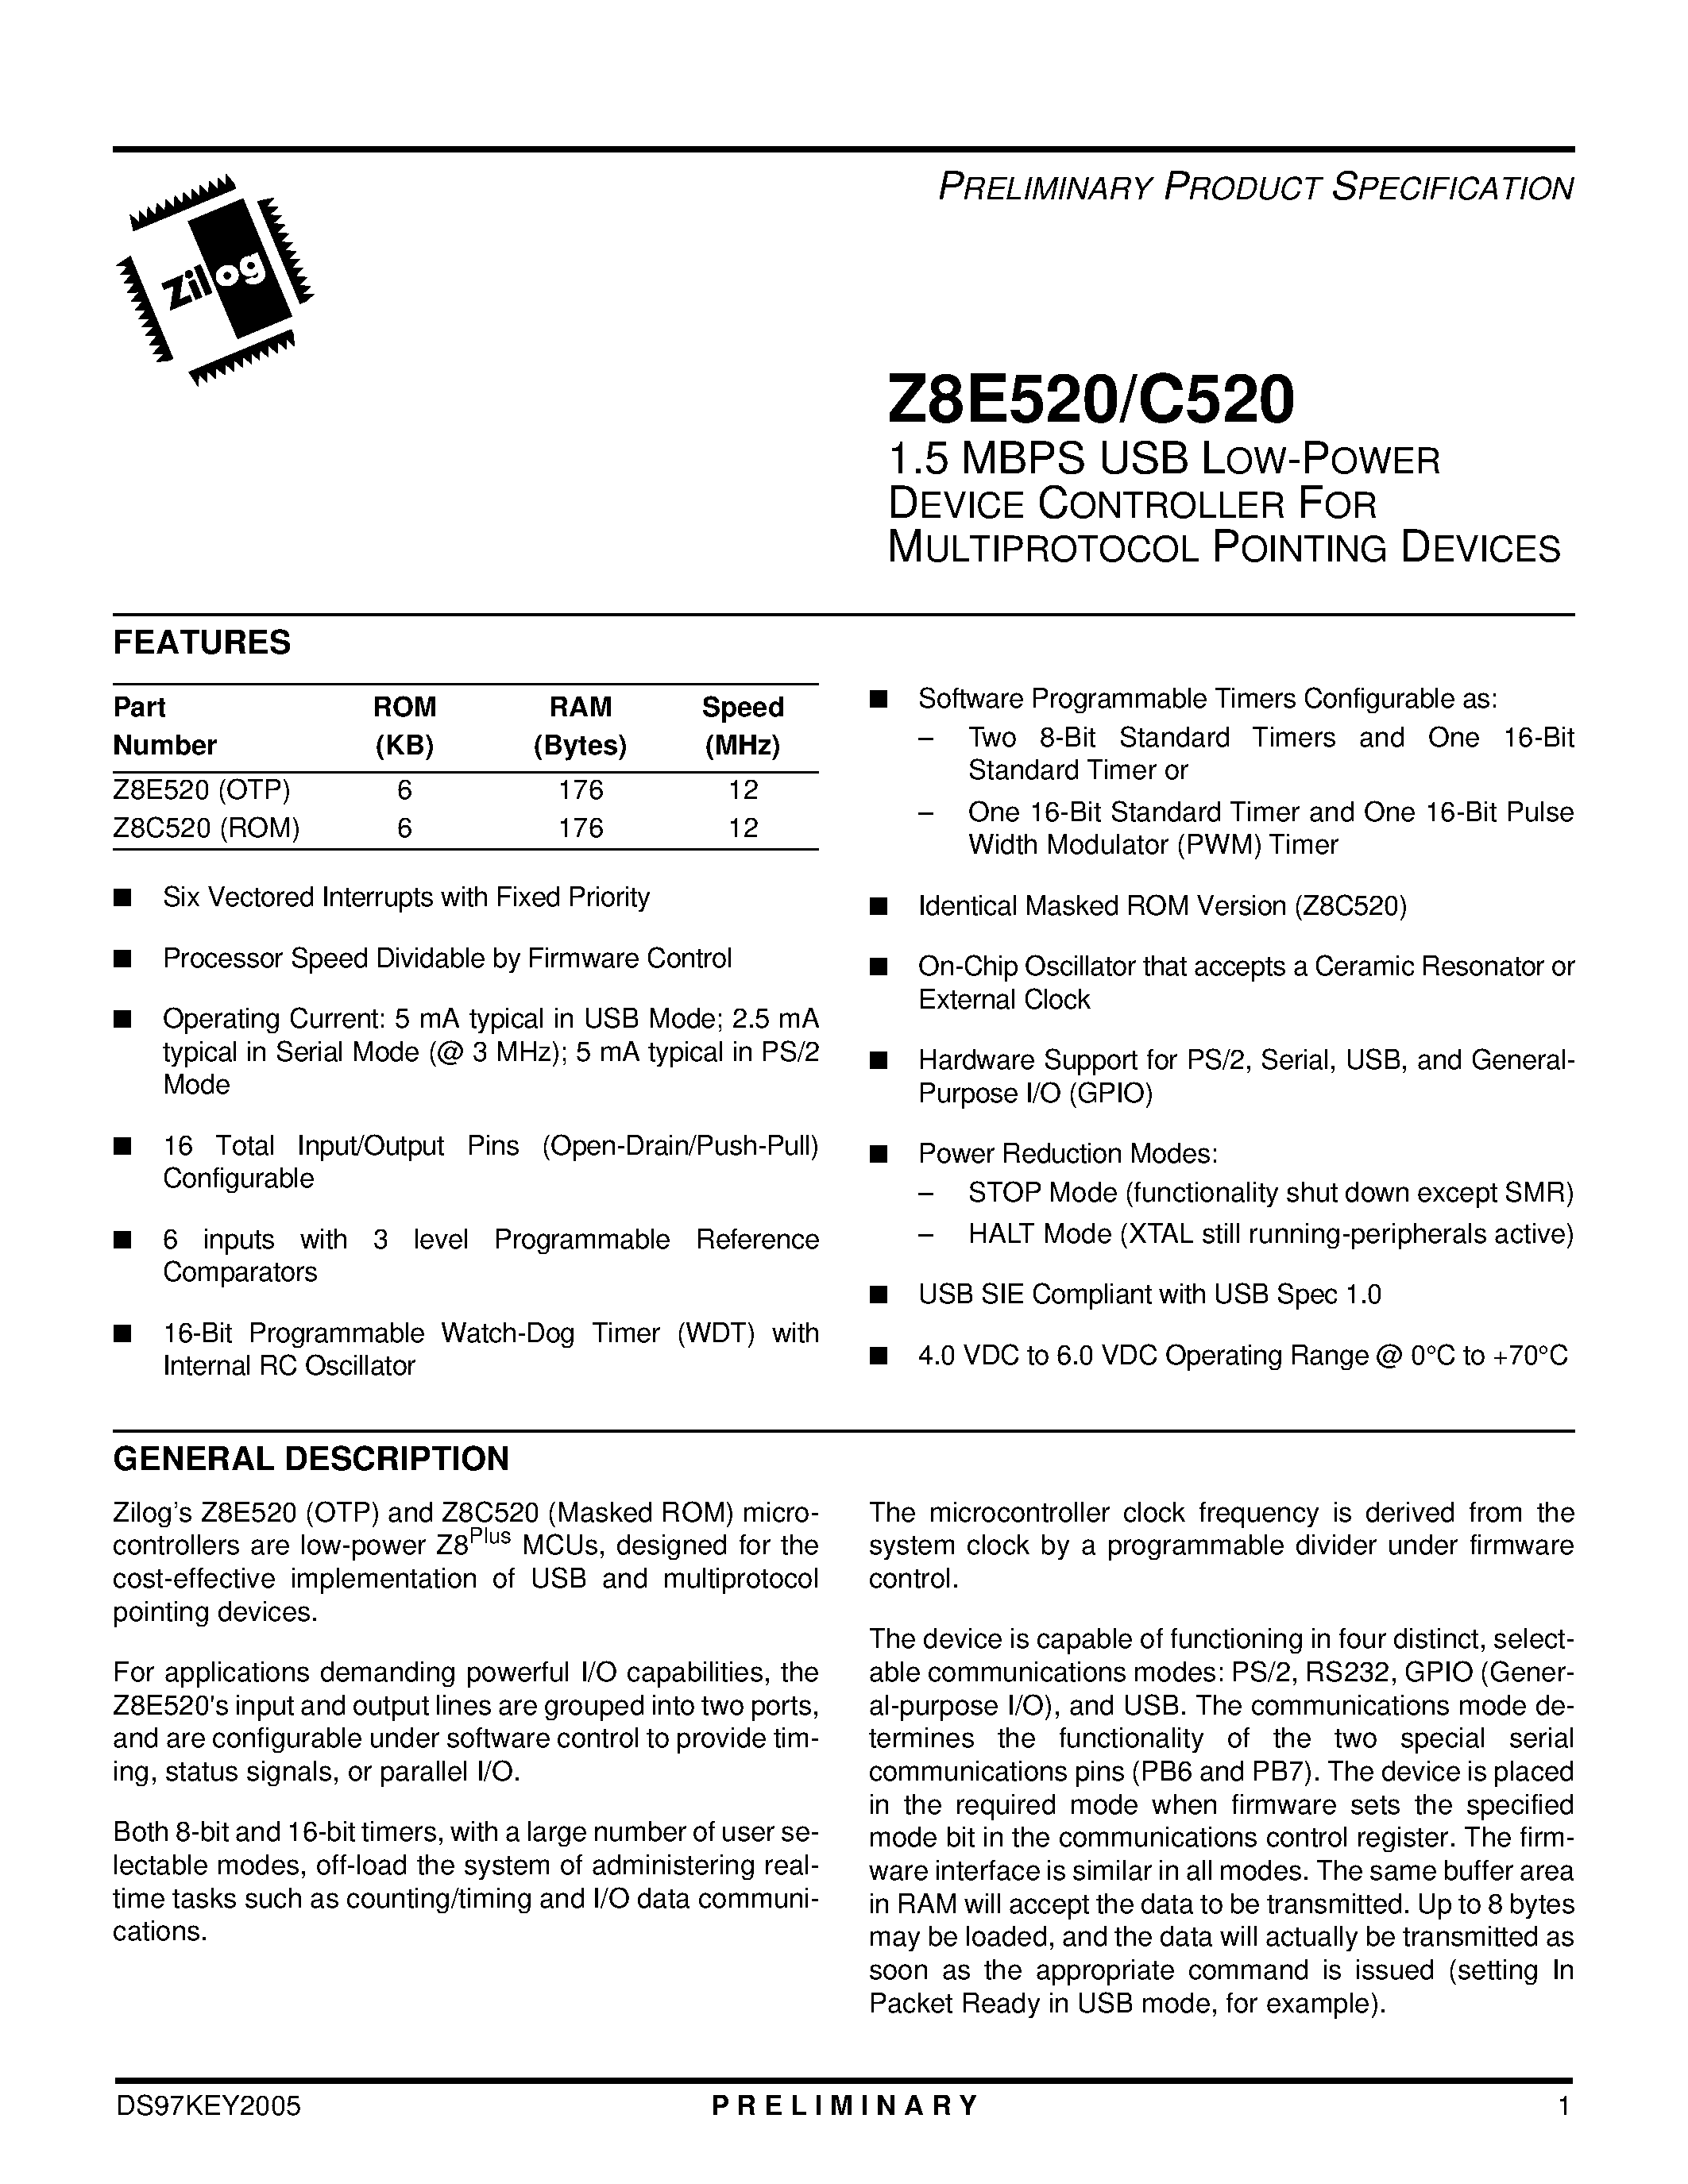 Datasheet Z8E520 - 1.5 MBPS USB Device Controller page 1